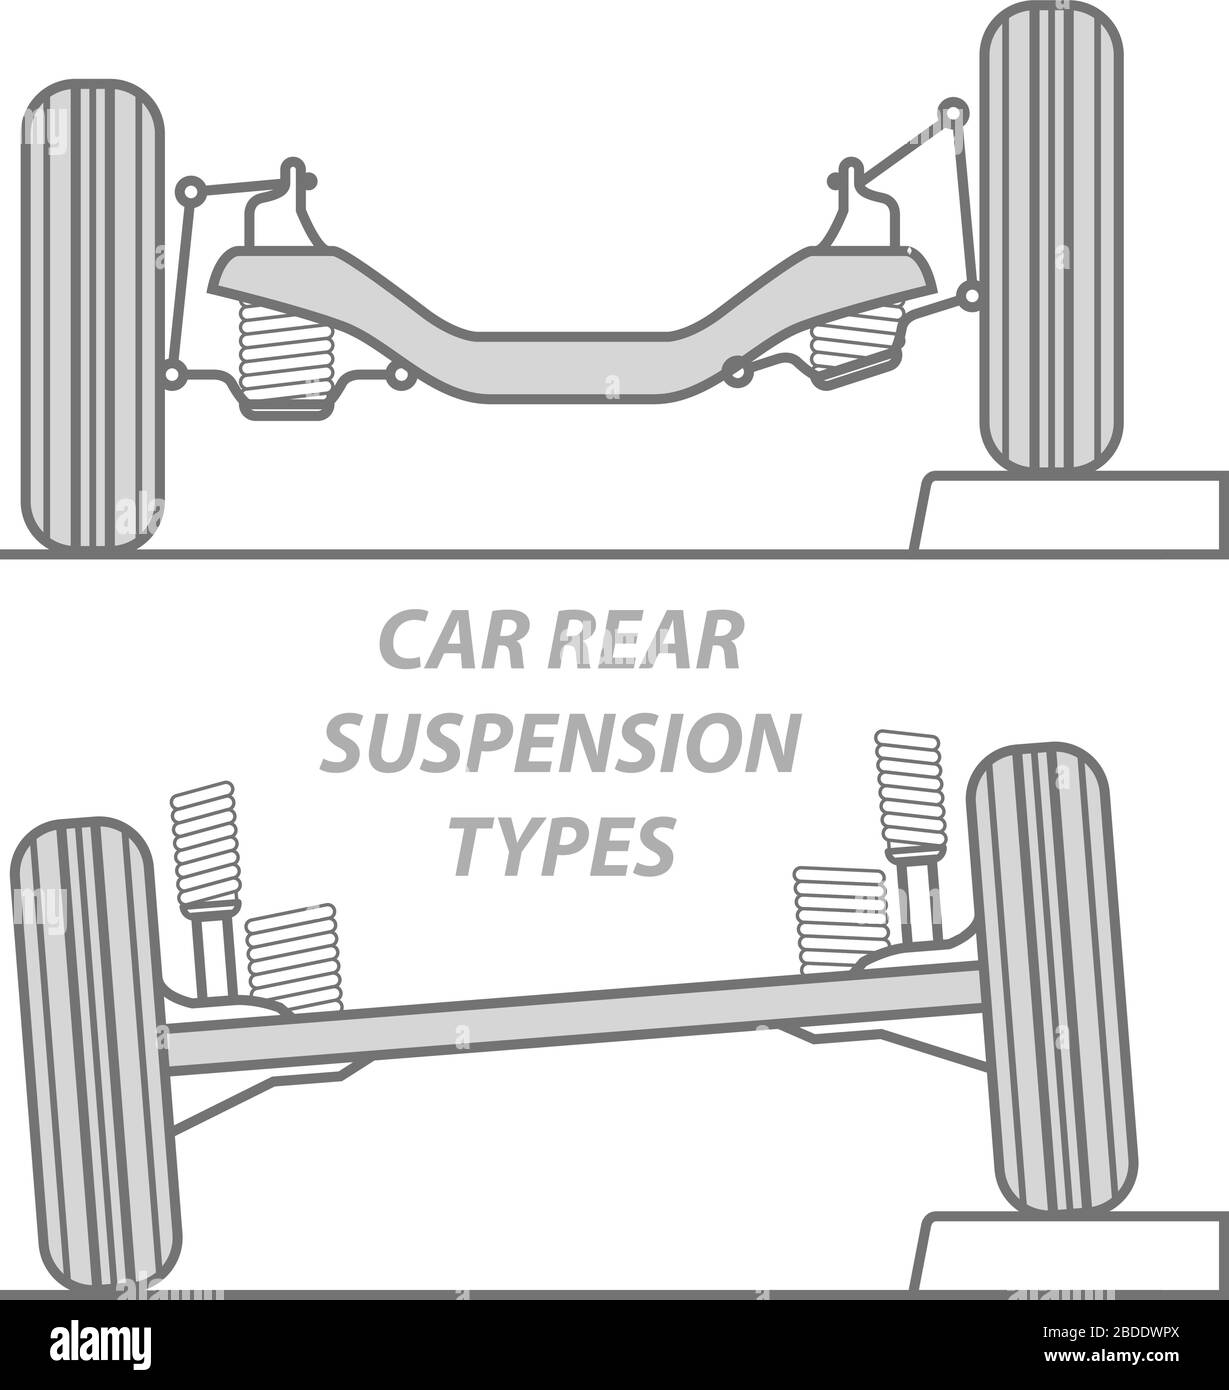 Difference between car rear suspension types - solid axle beam and rear independent suspension, rear wheel axle principle of operation Stock Vector